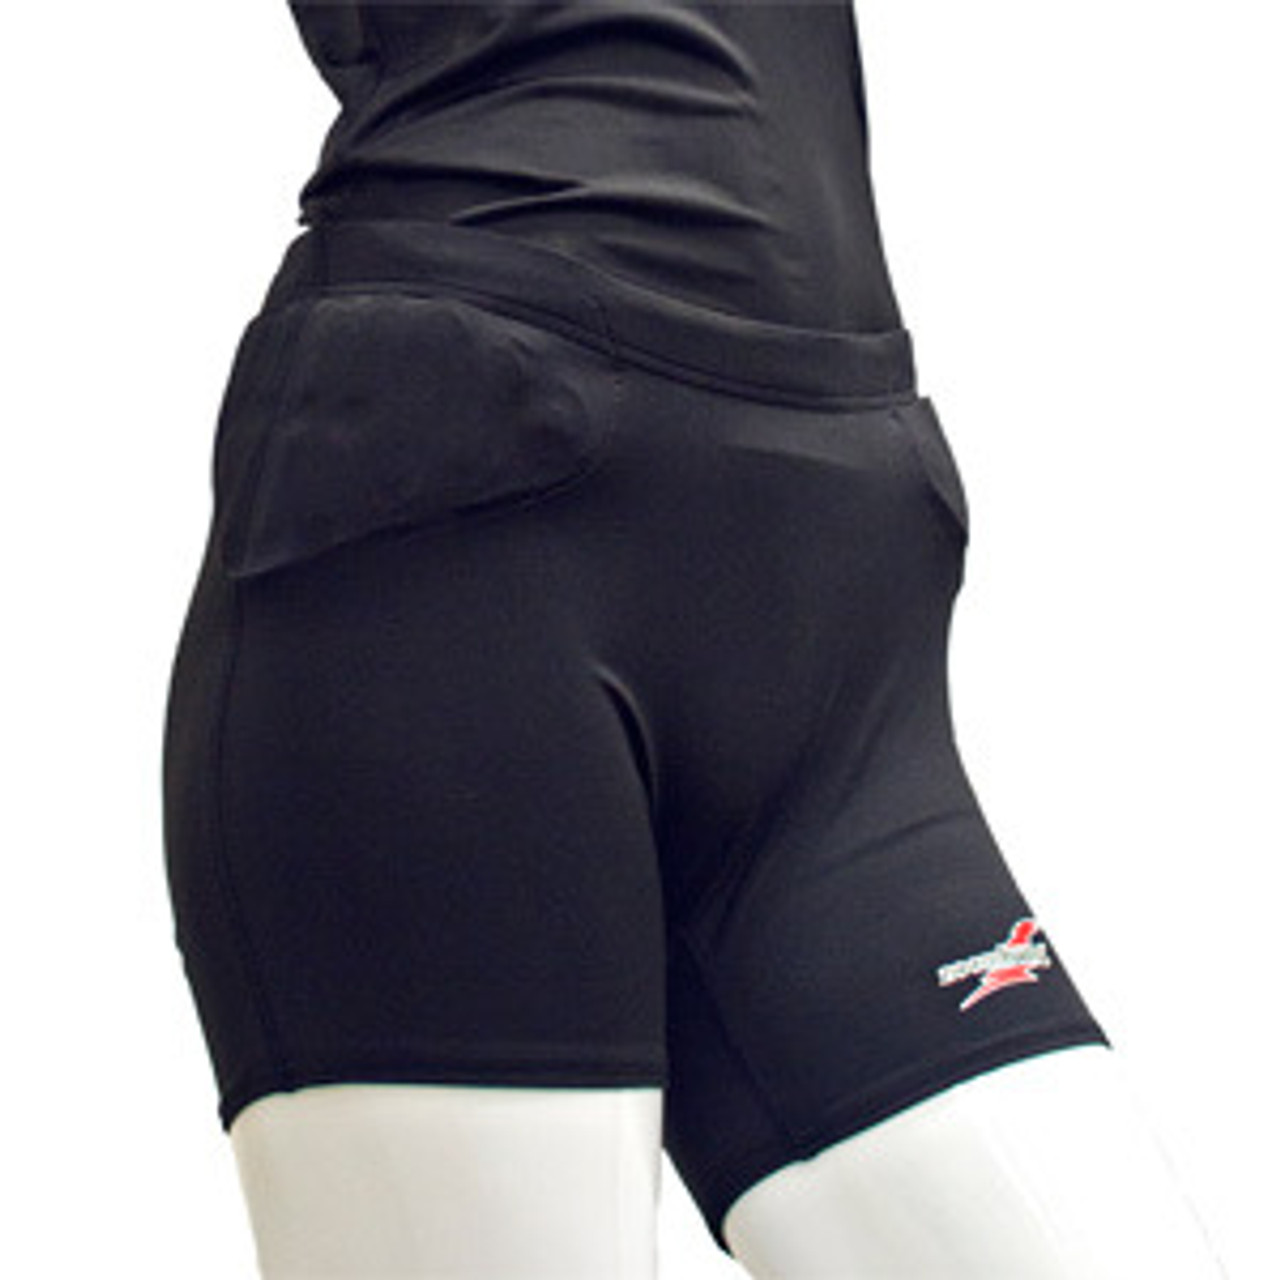 Zoombang Female Volleyball Shorts ZB-With Pelvic, Hip, and TB